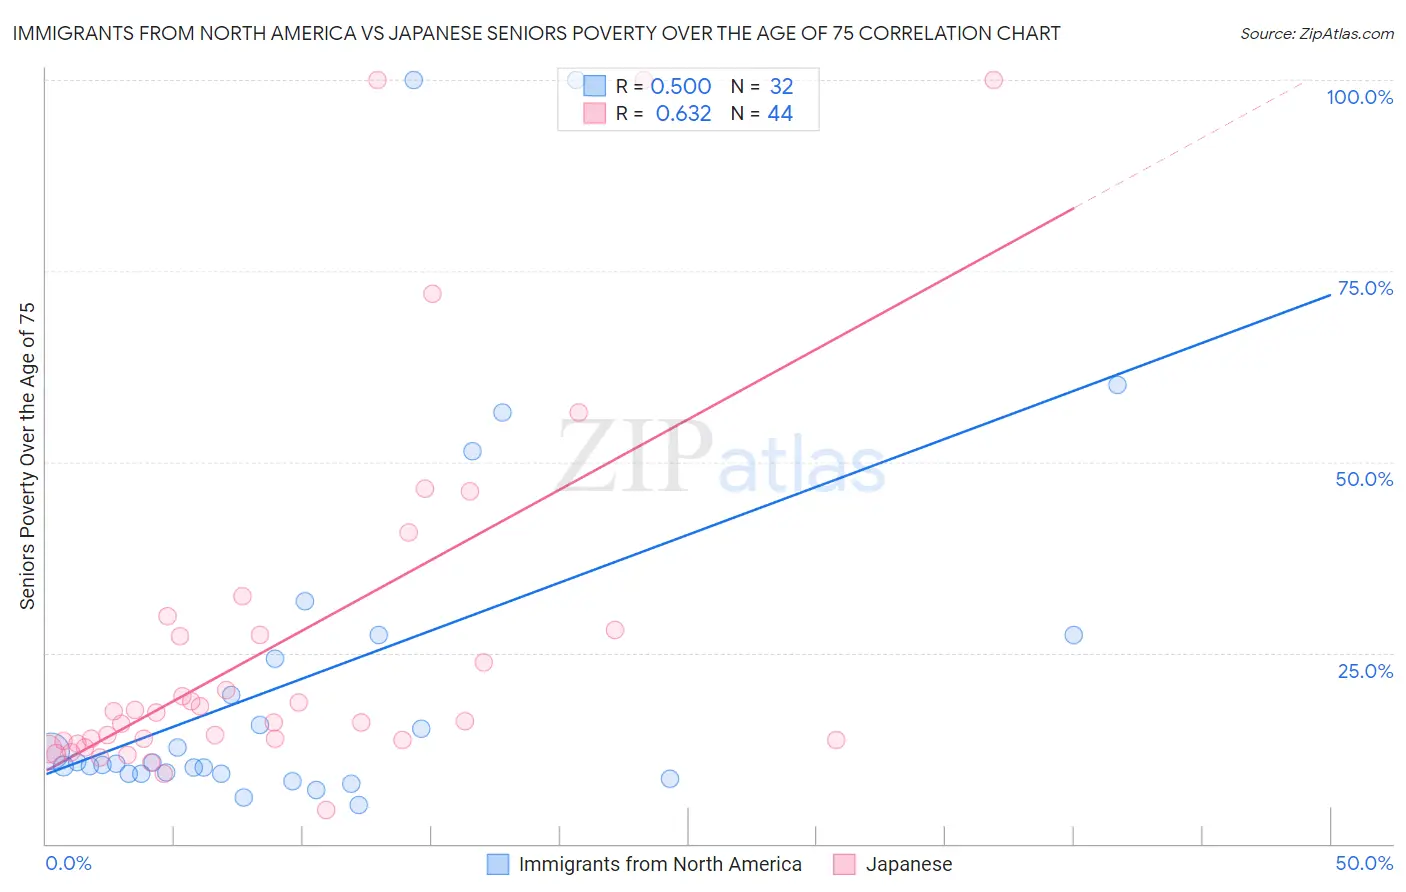 Immigrants from North America vs Japanese Seniors Poverty Over the Age of 75